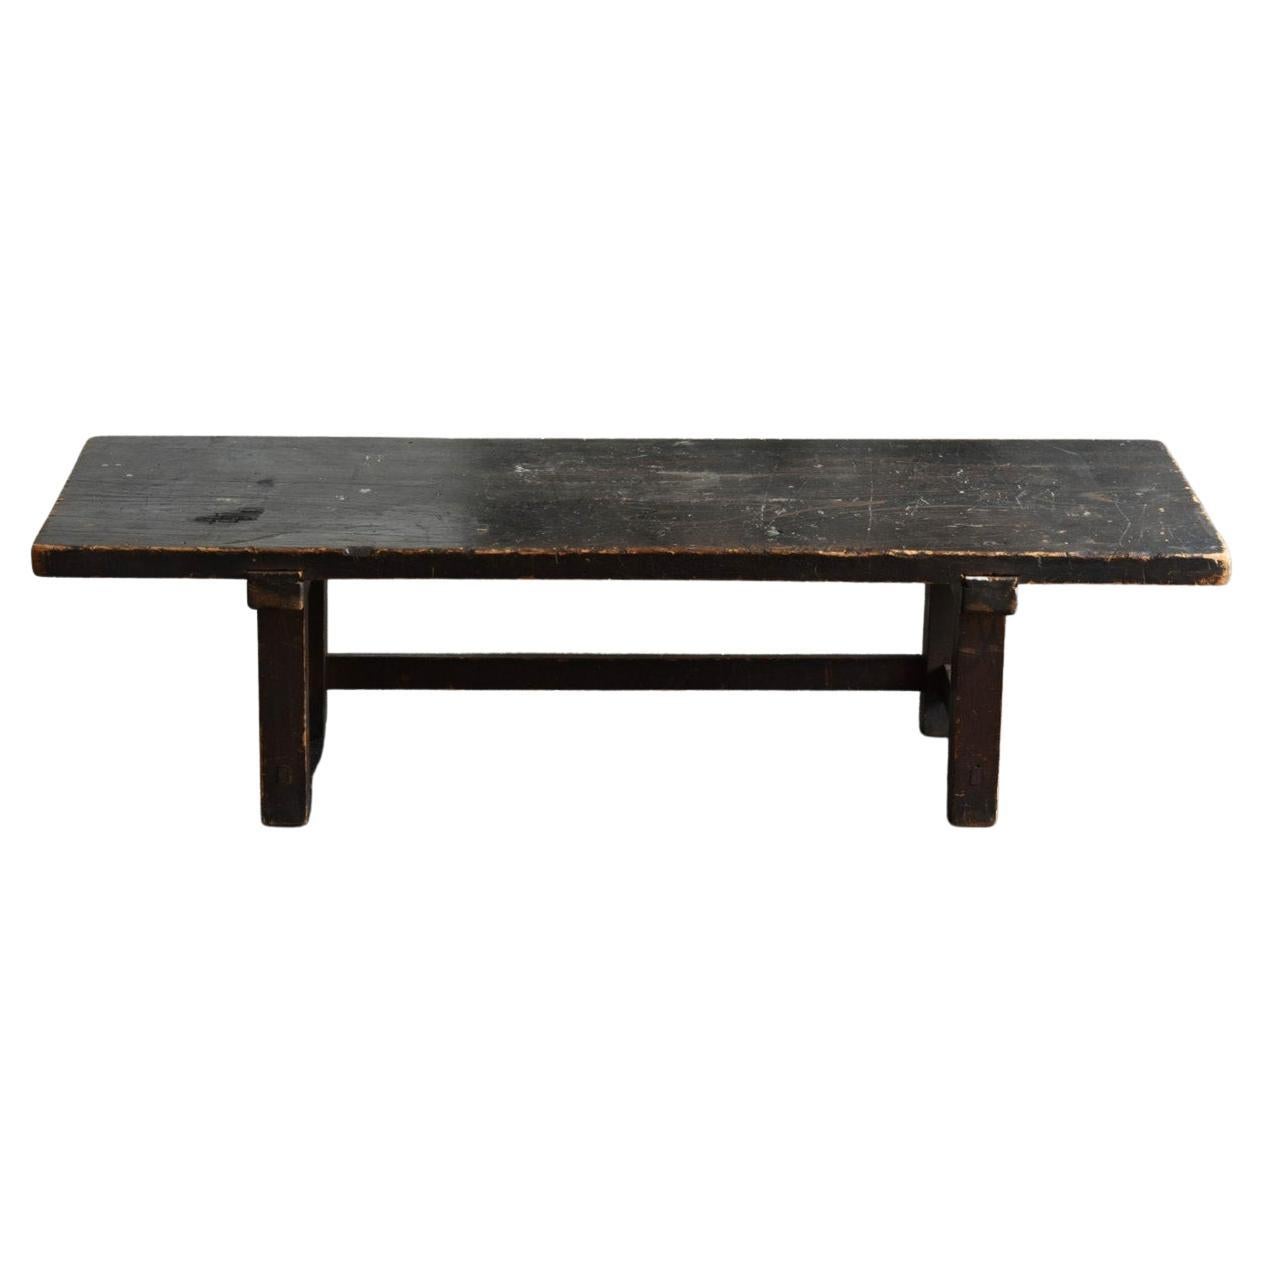 Japanese Antique Wooden Low Table/1800-1900/Edo-Meiji Period/Simple Sofa  Table For Sale at 1stDibs